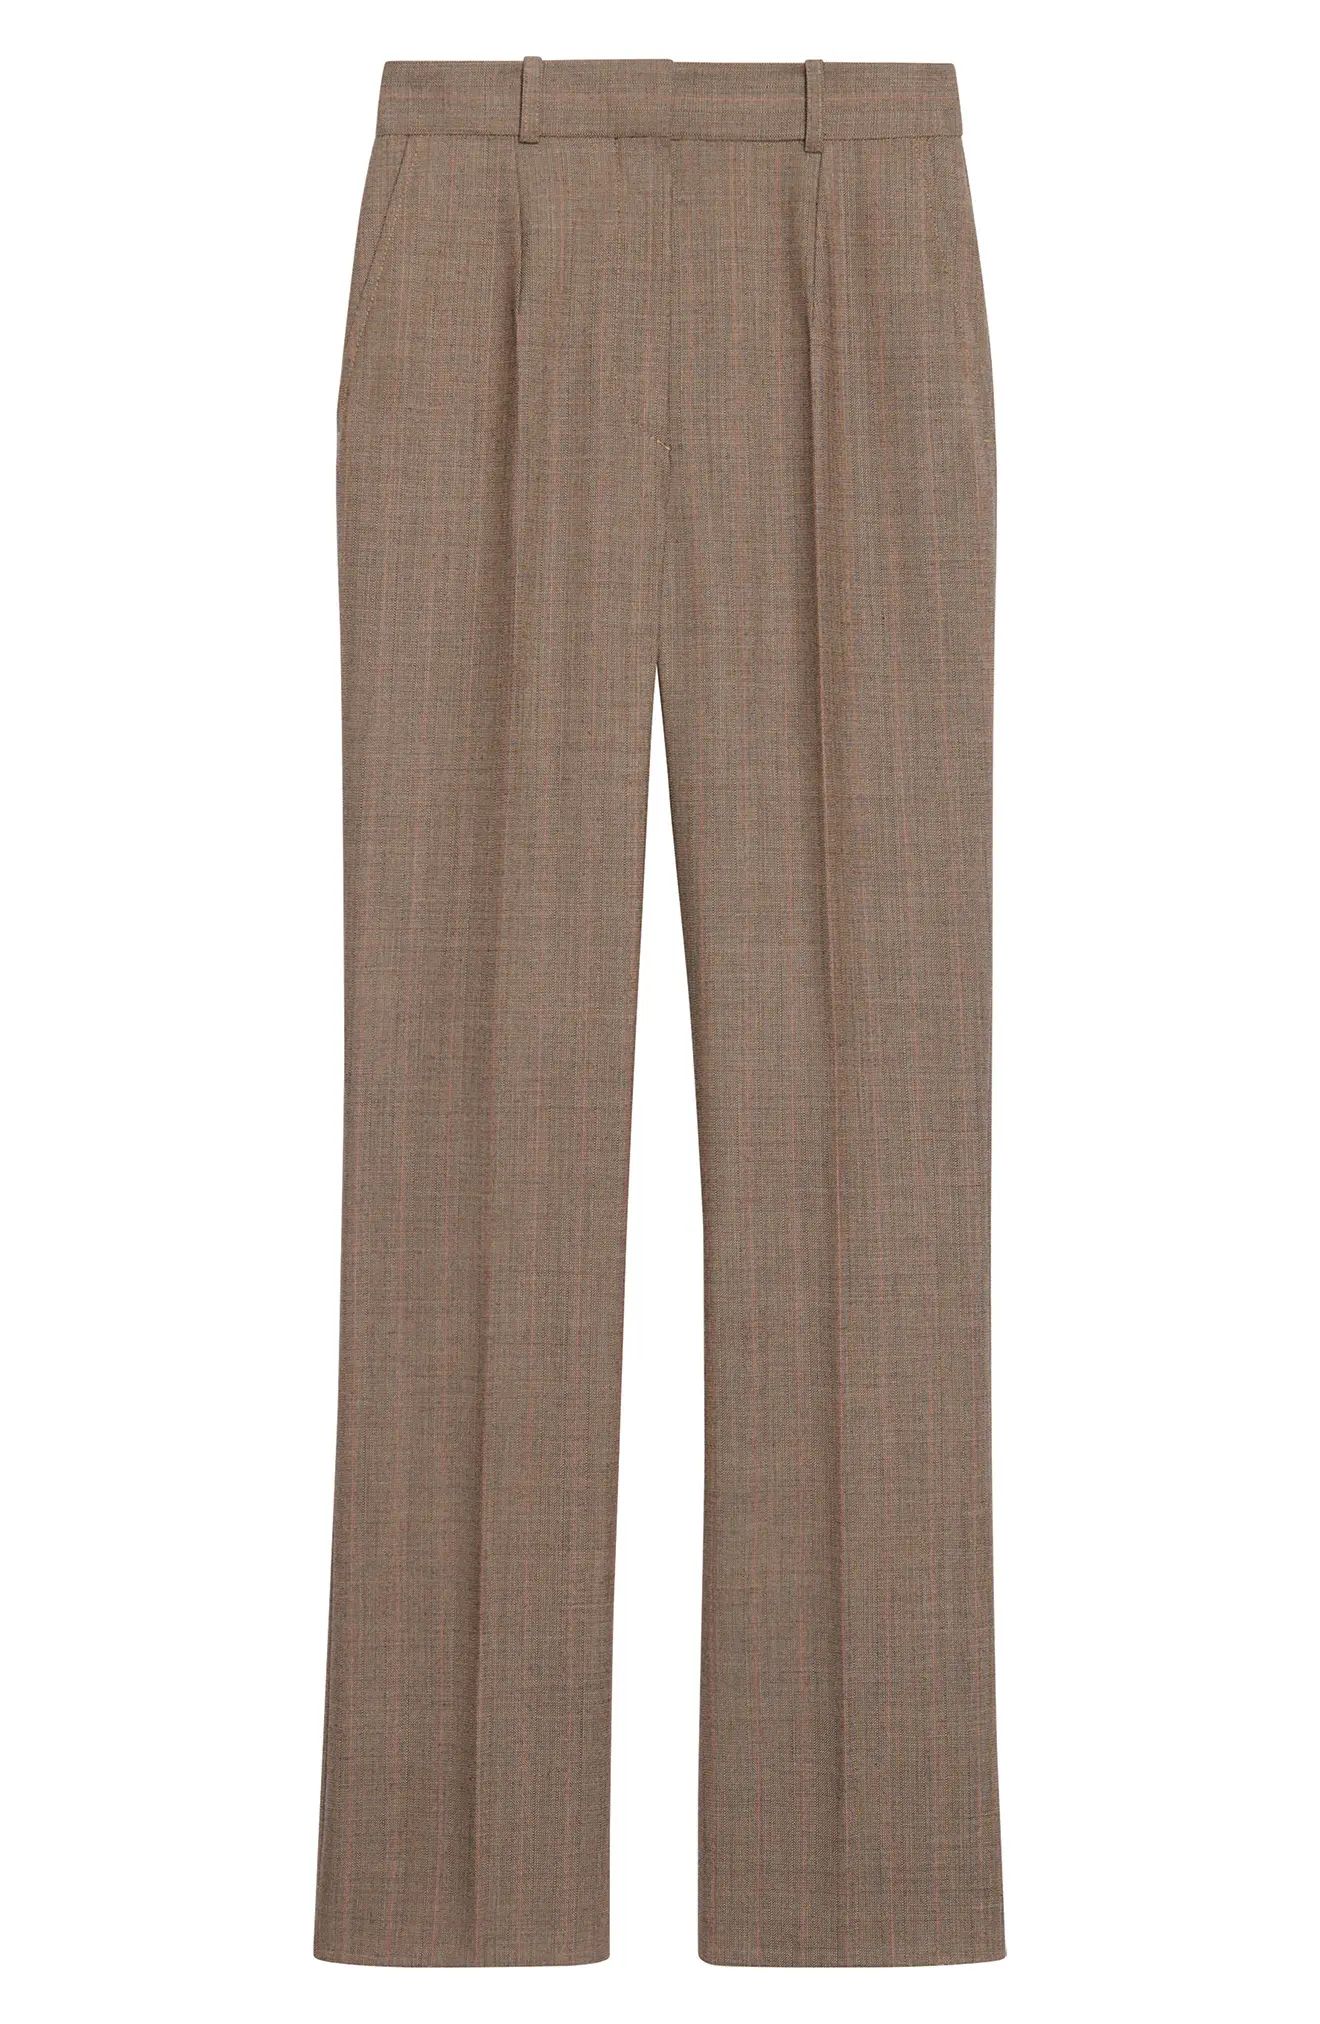 sandro Smart Windowpane Plaid Trousers, Size 4 Us in Taupe at Nordstrom | Nordstrom